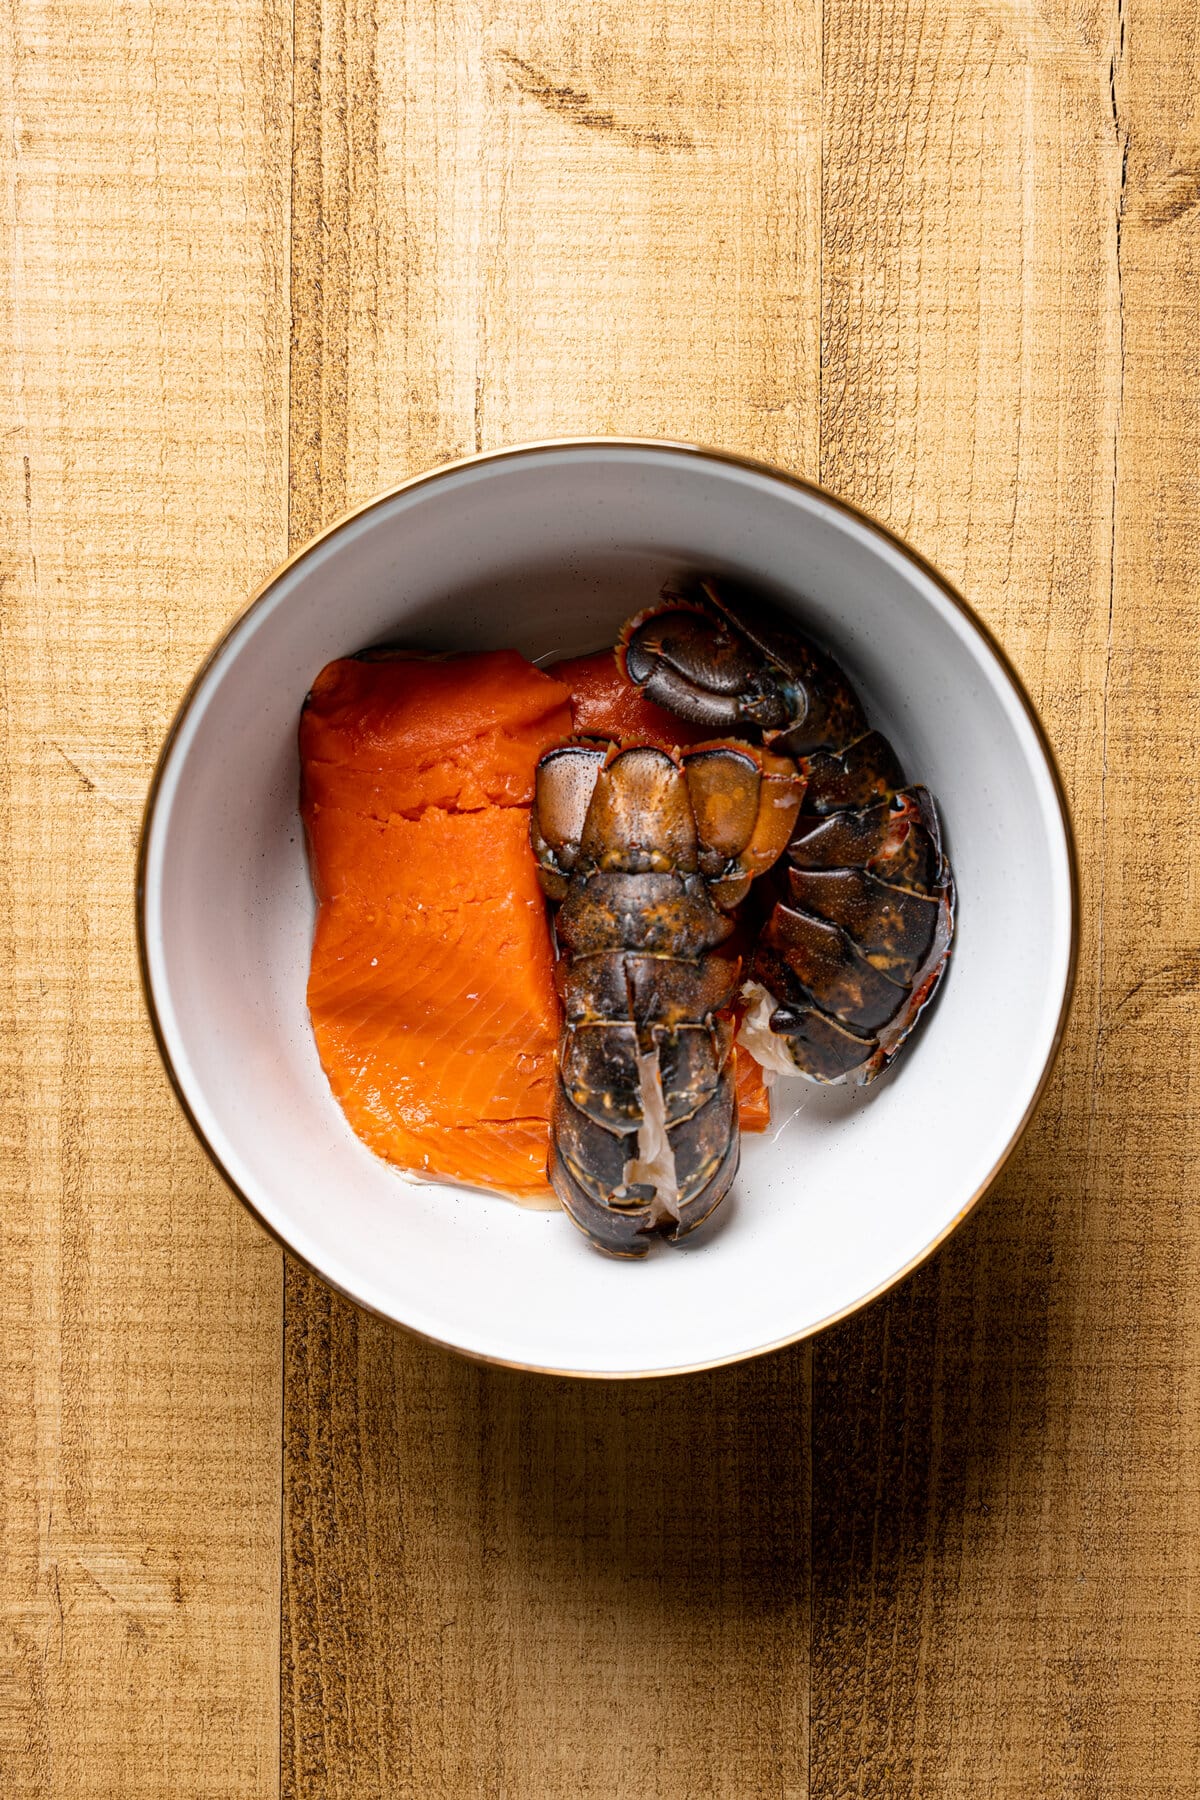 Lobster tails and salmon in a bowl